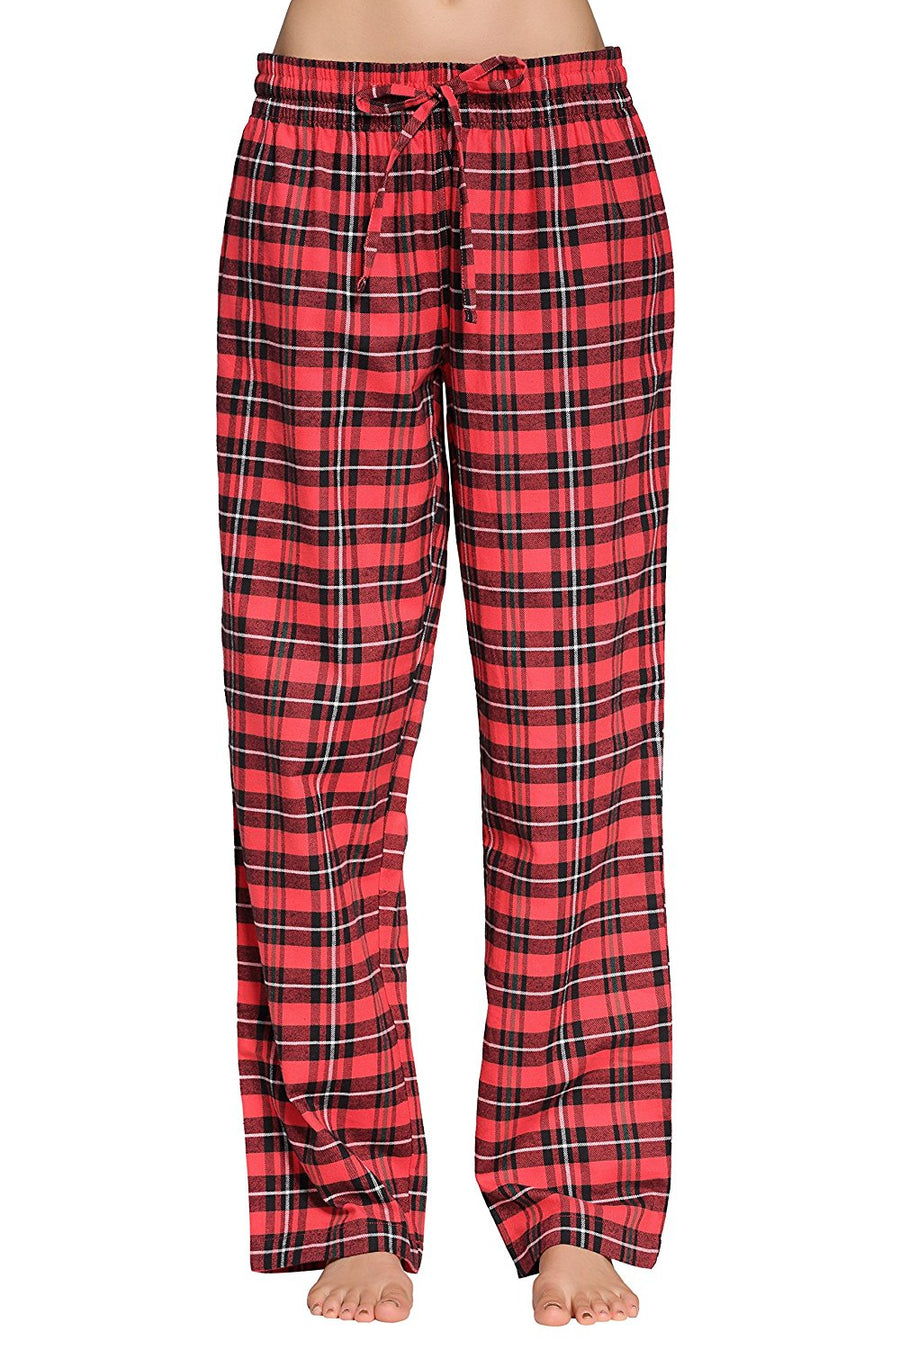 NORTY Mens Pajama Sleep Lounge Pant - 100% Brushed Cotton Flannel - 8 – The  Norty Brand